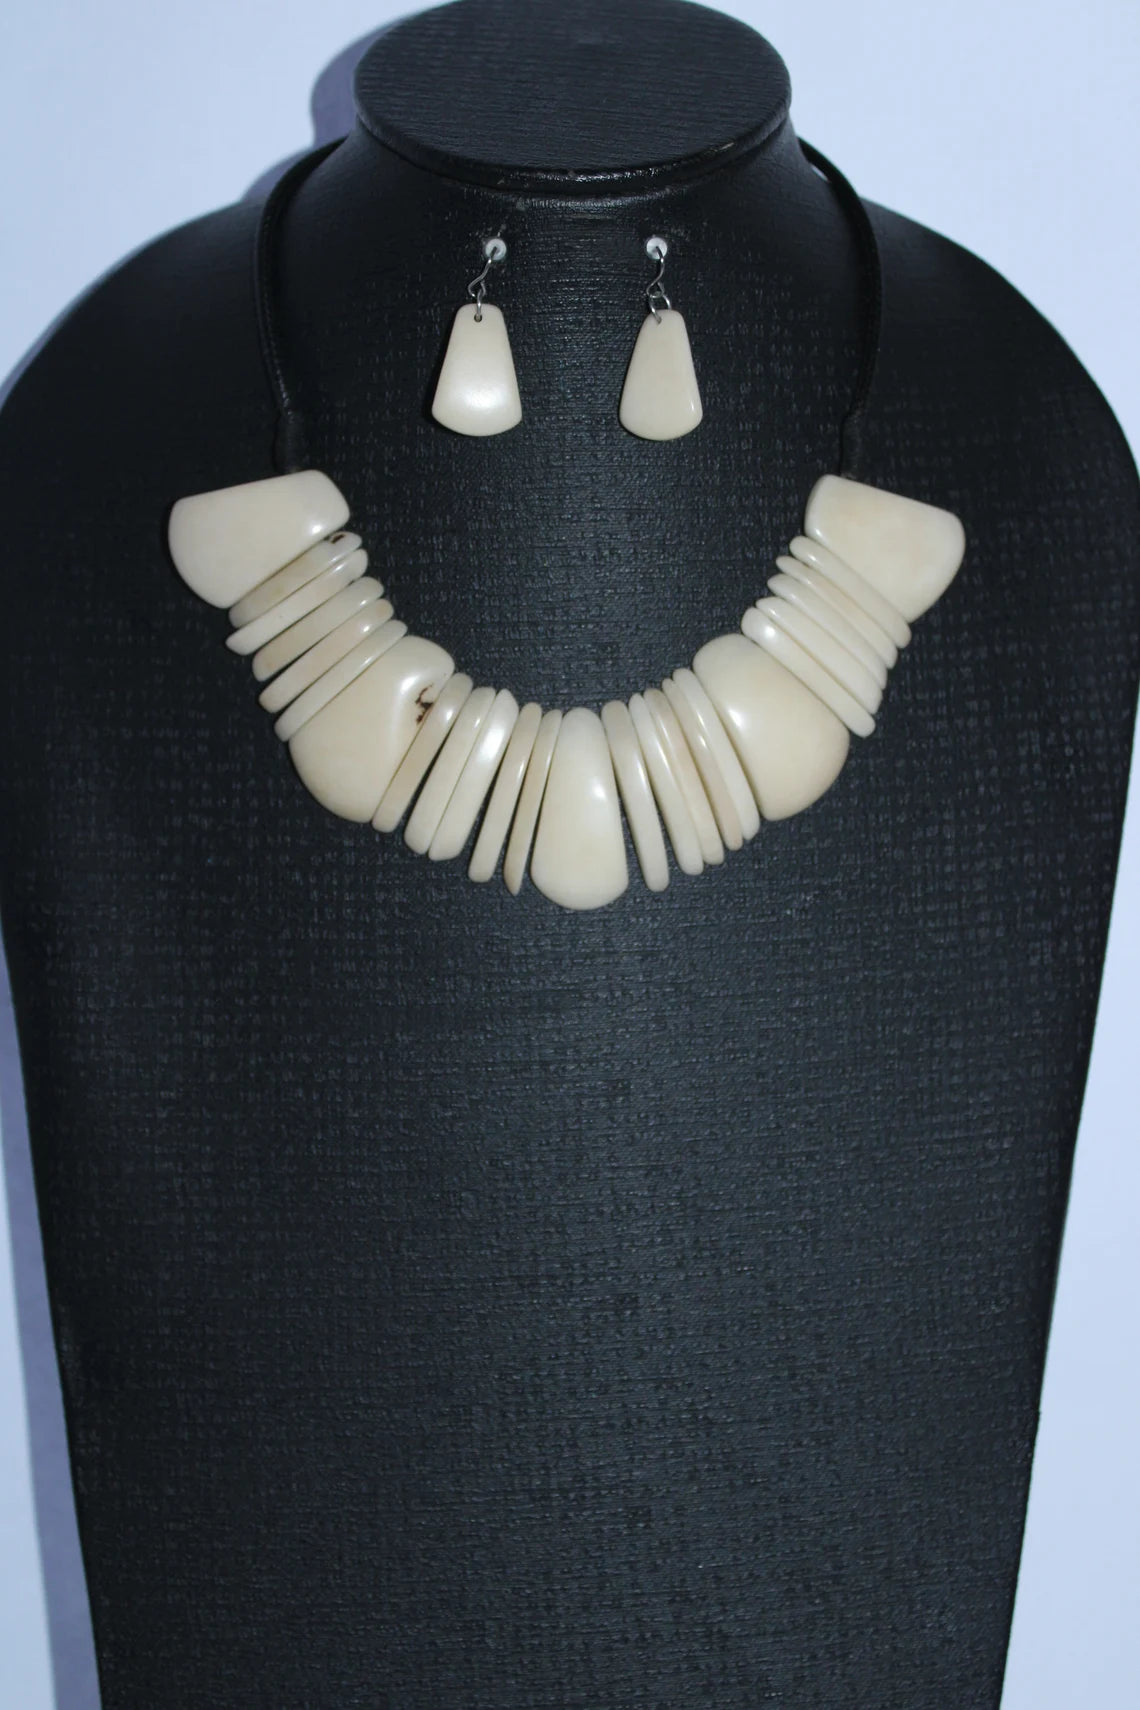 Tagua Necklace and Earrings Set in Beige Color.